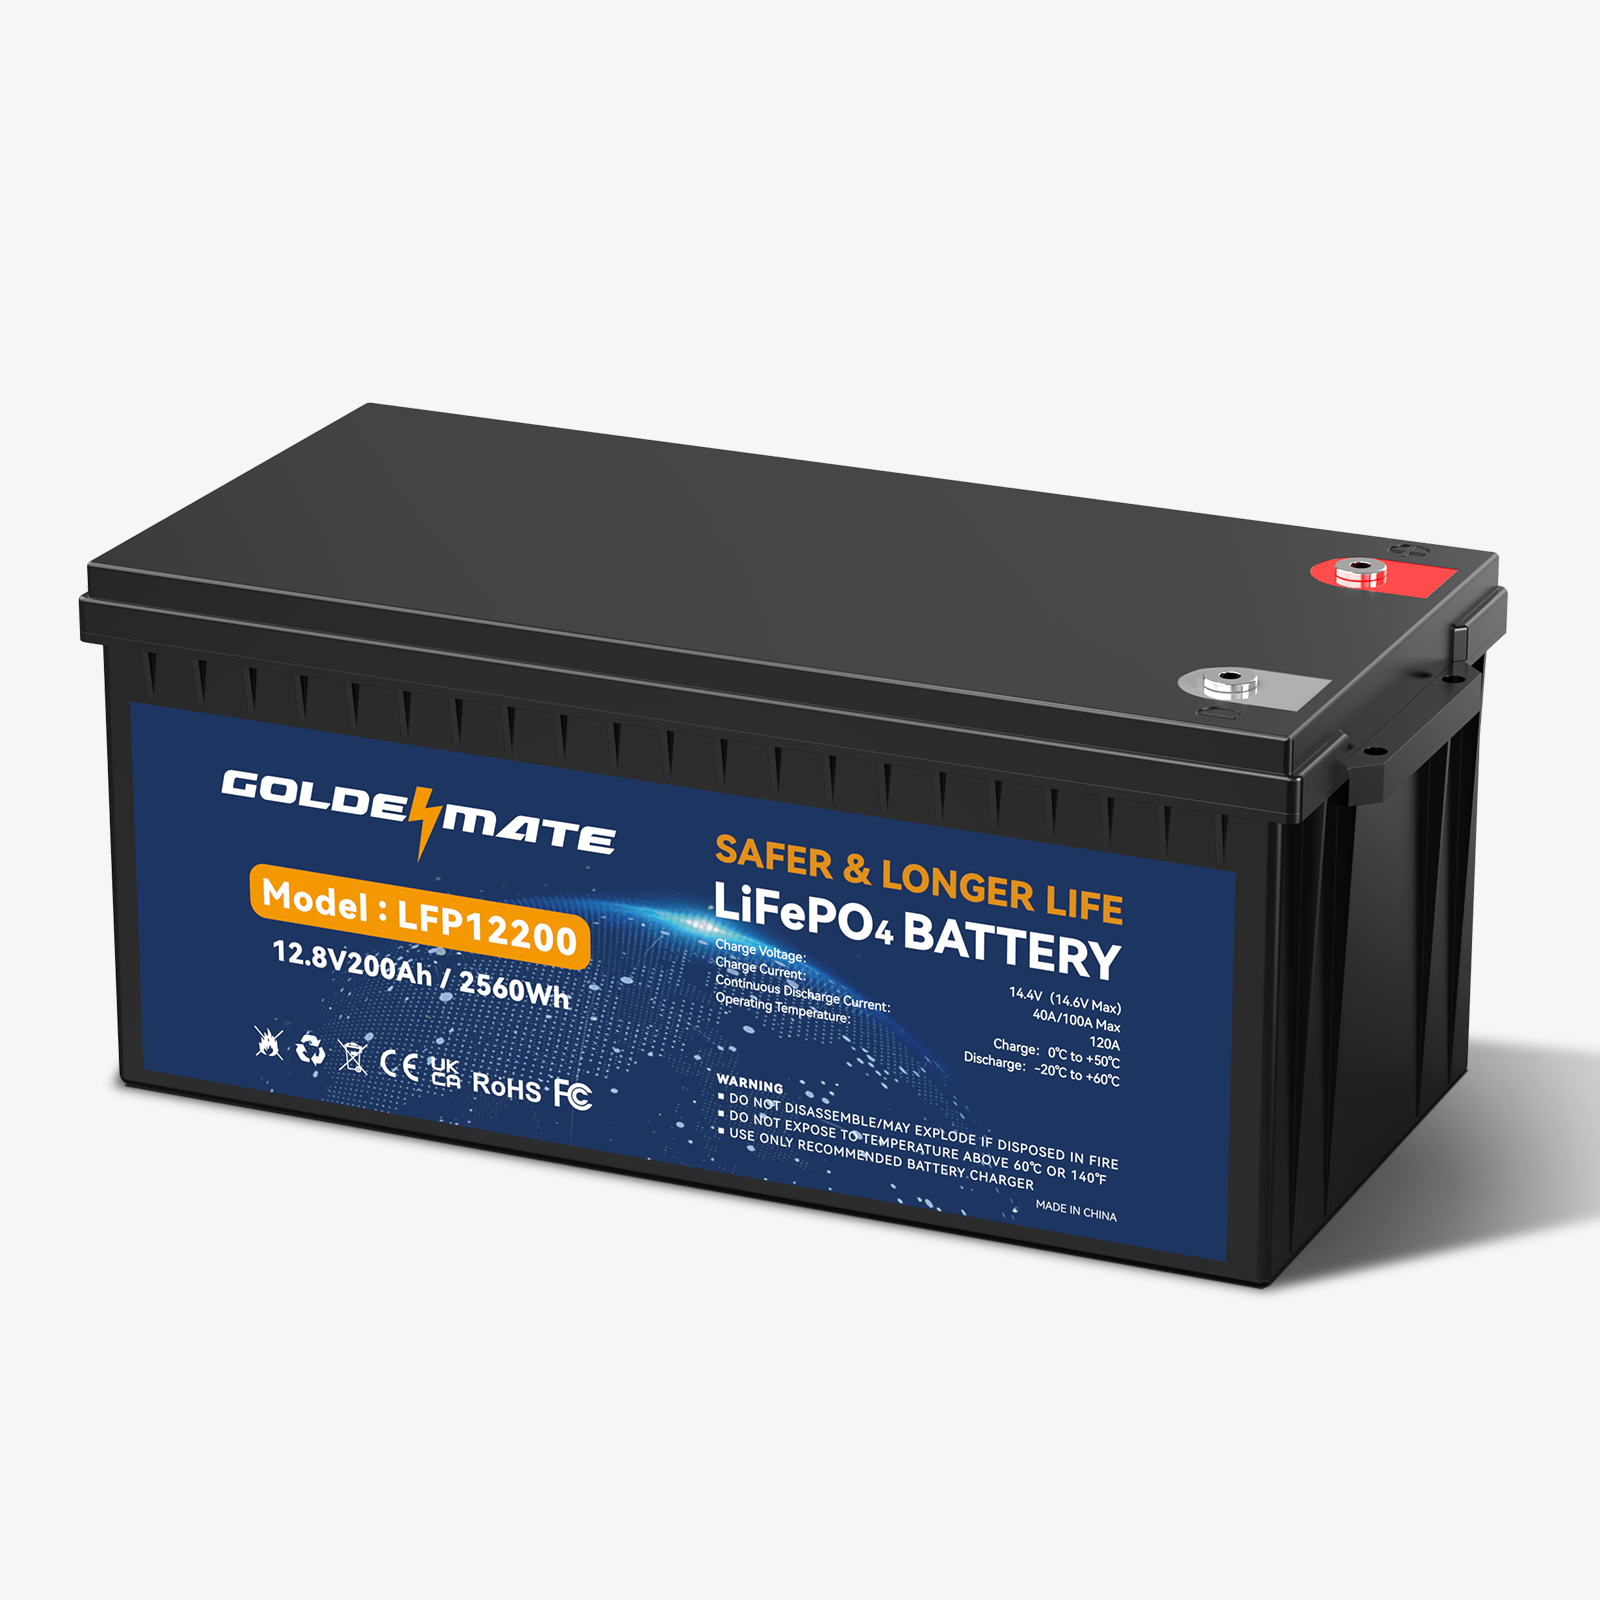 12V 200Ah LiFePO4 Lithium Battery, 2560Wh Energy, Build-In BMS